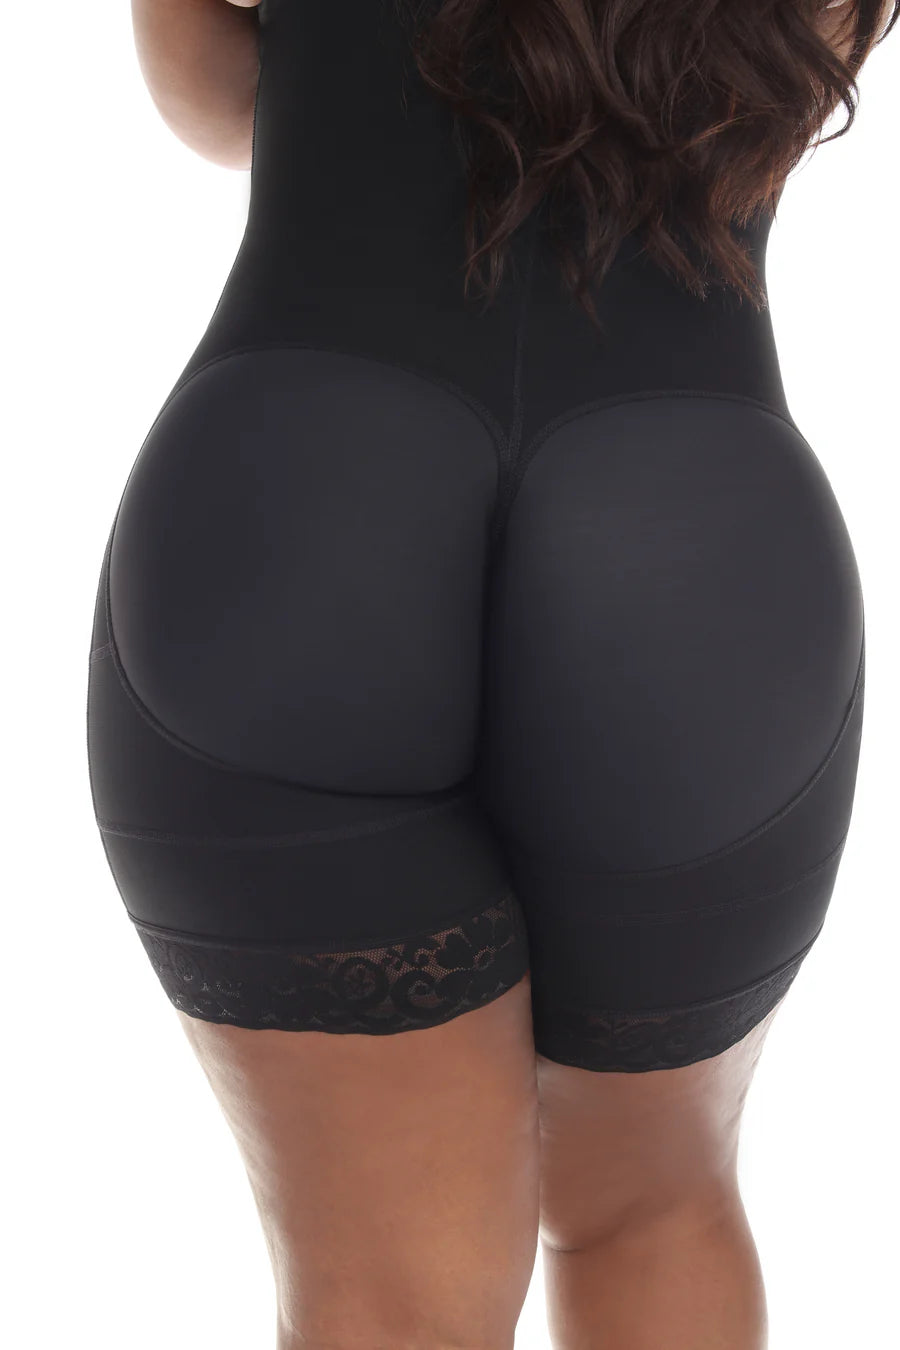 Curves Enhanced: Explore Our Best BBL Shapewear Collection